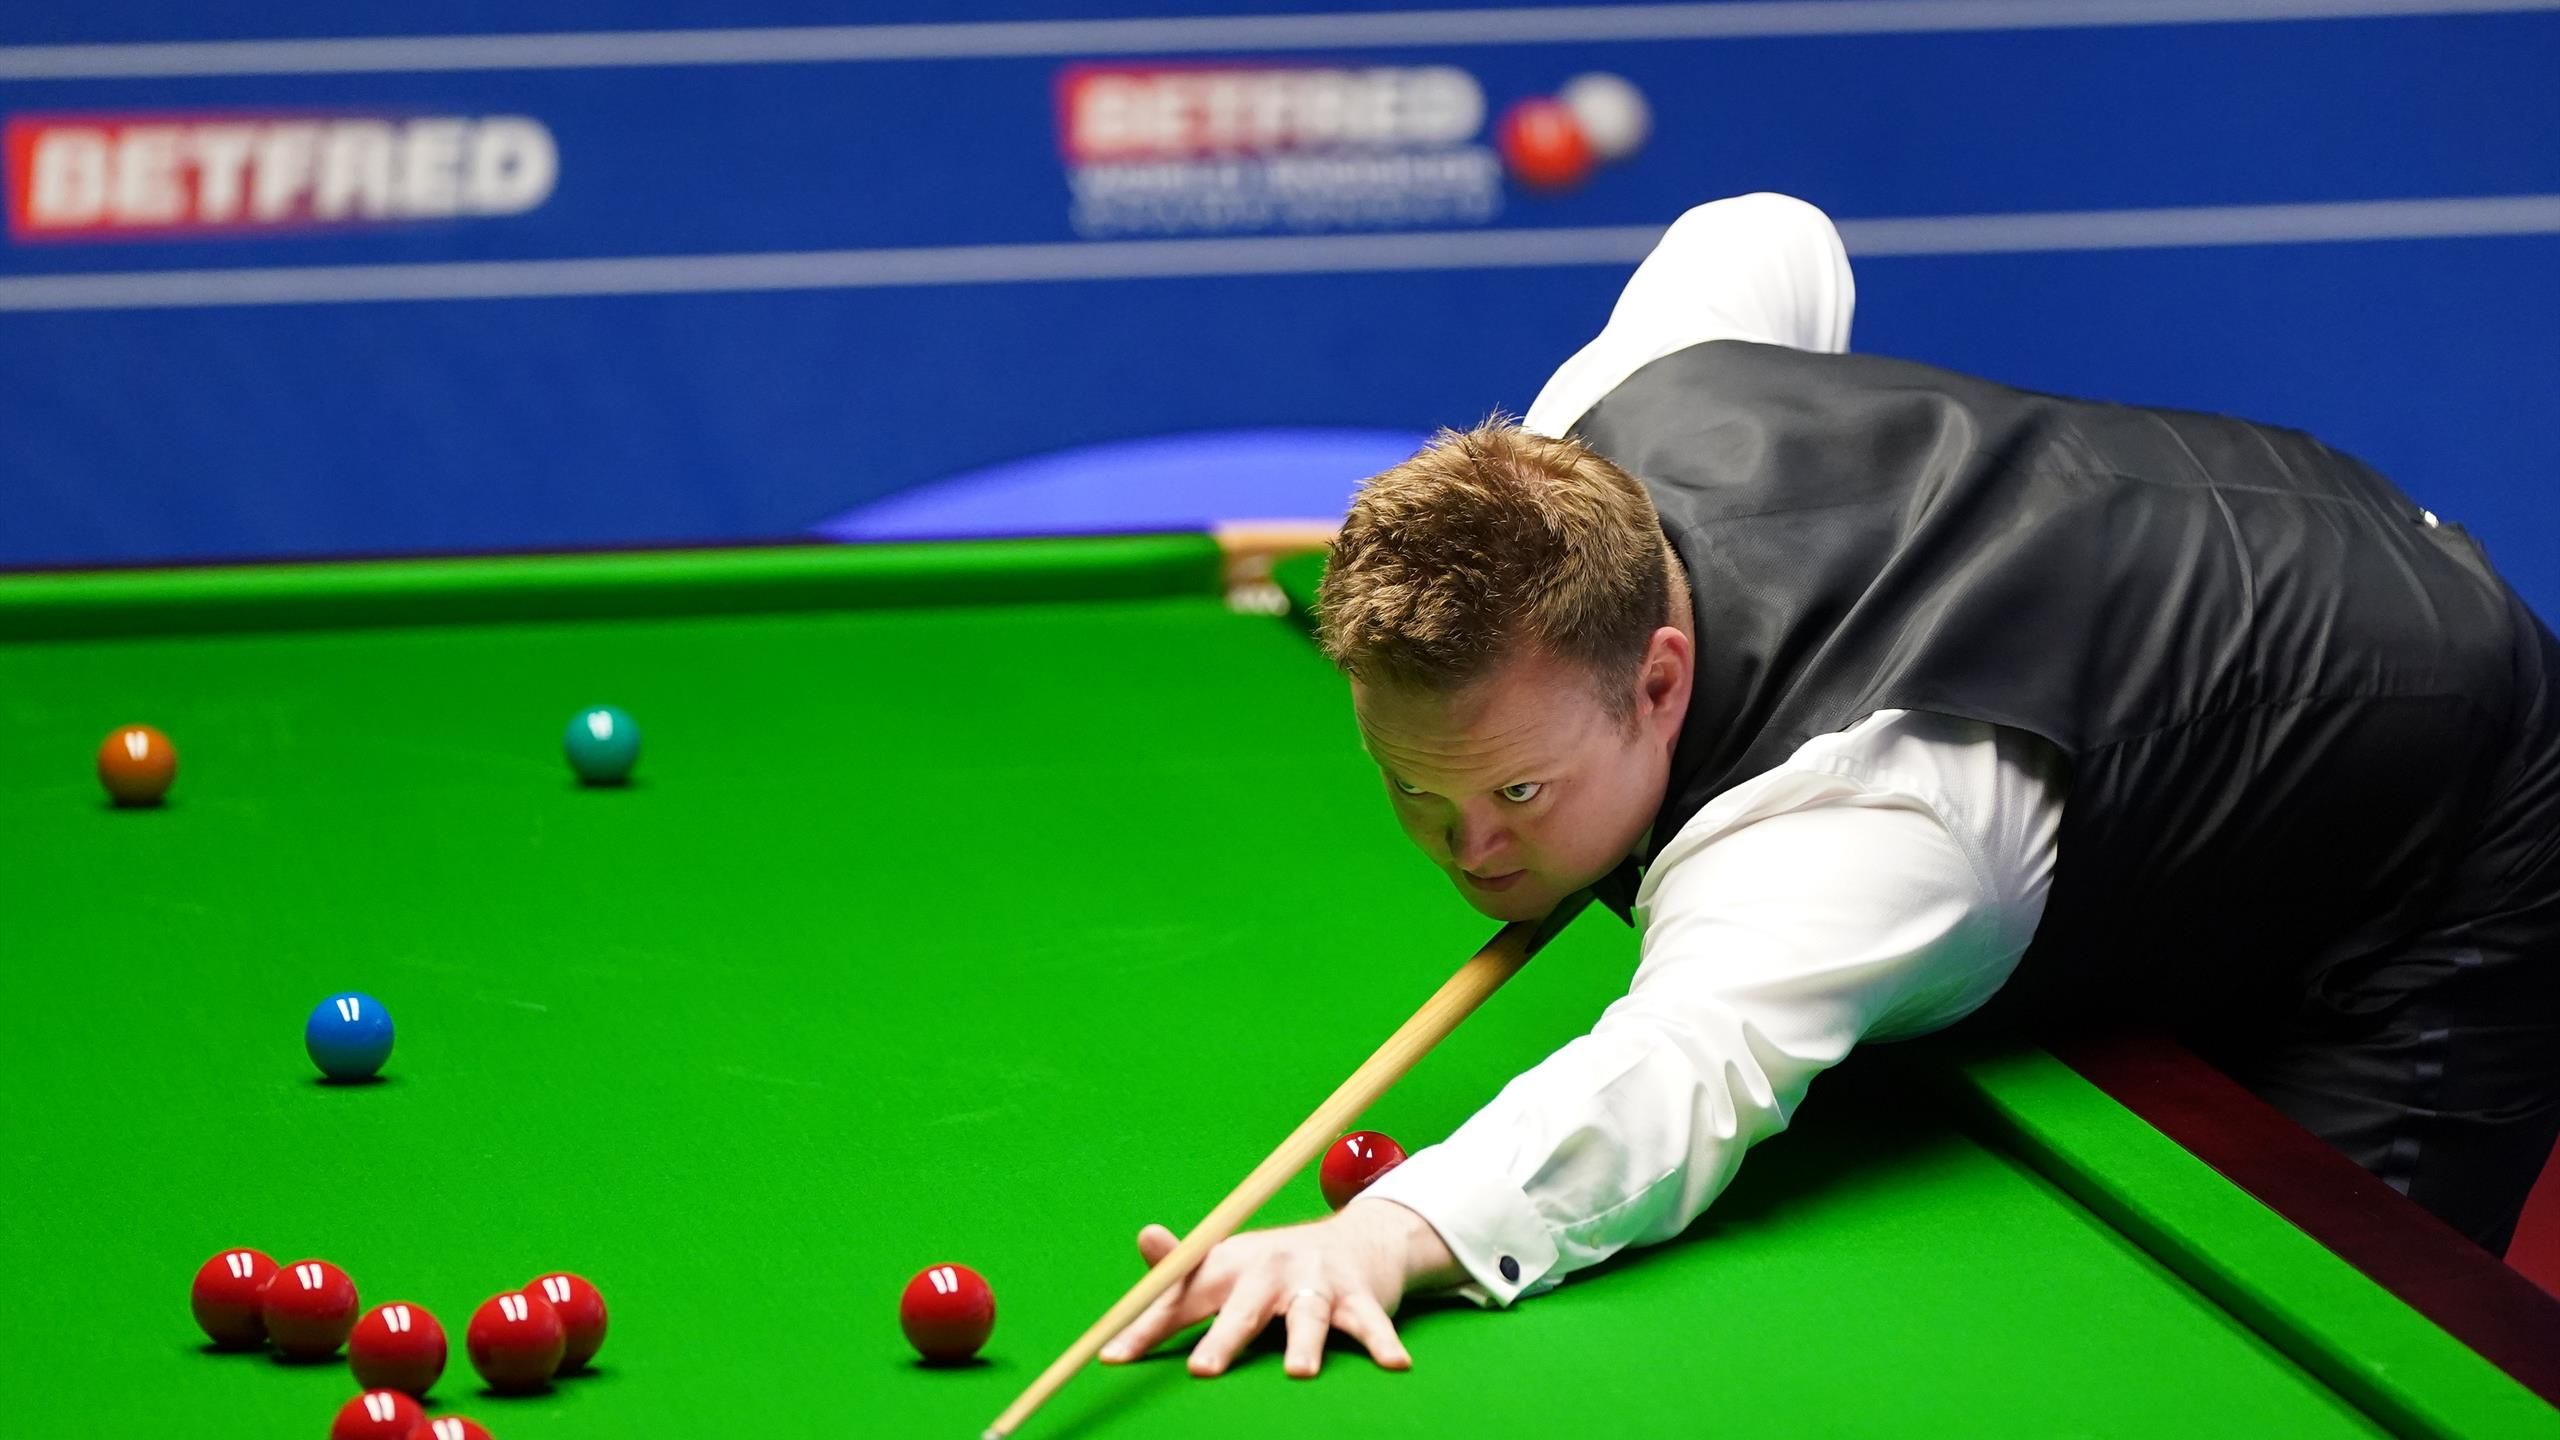 world snooker championship latest results